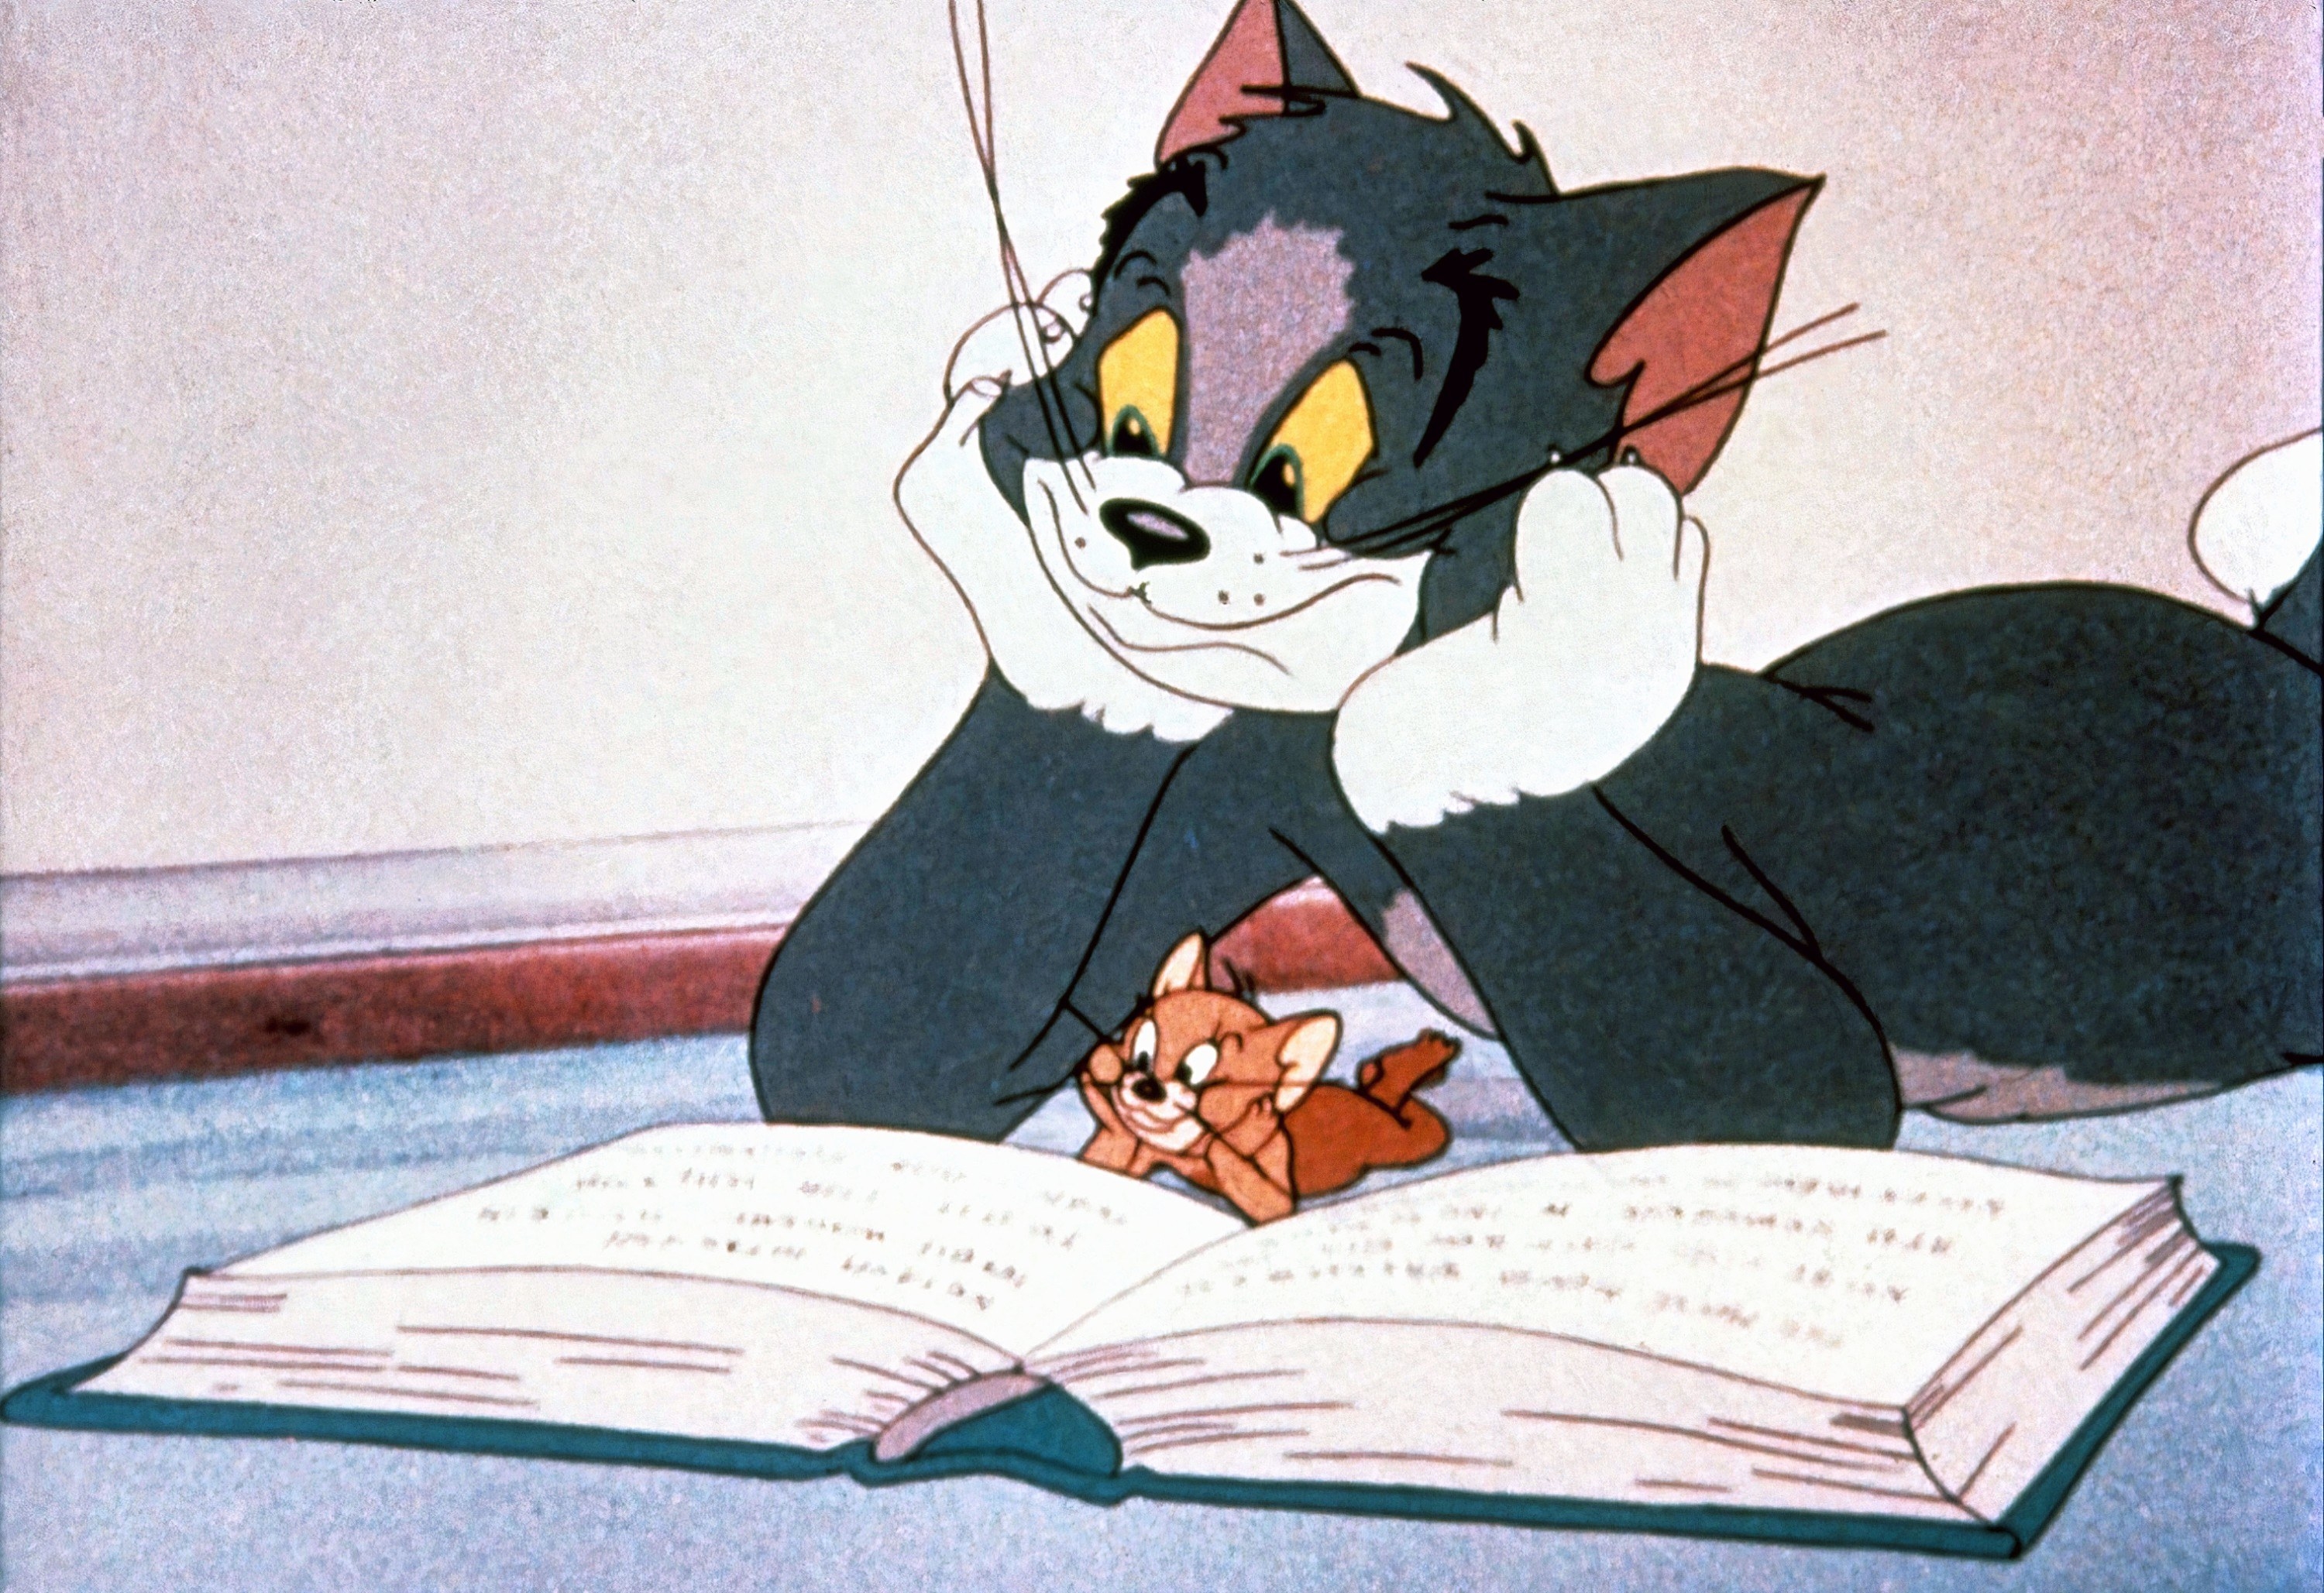 jerry and tom reading a book